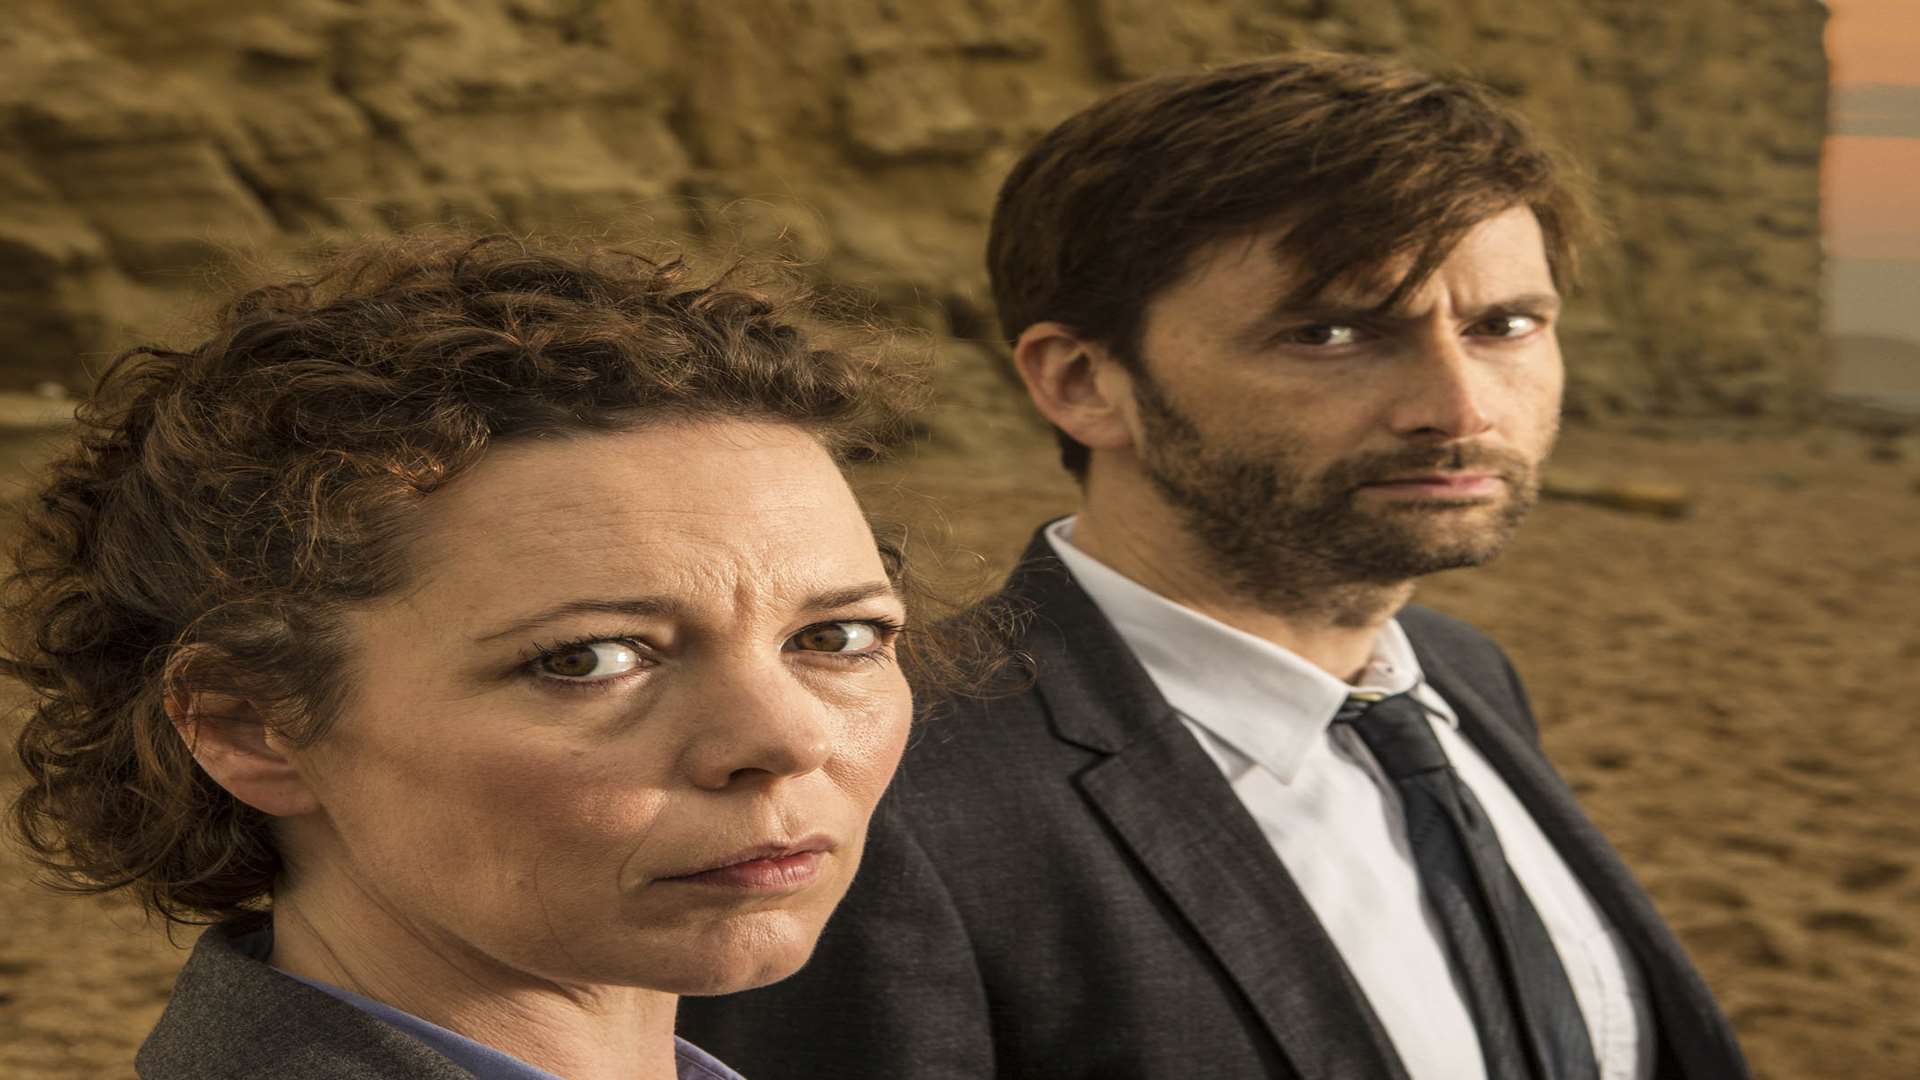 The author of Broadchurch, Erin Kelly, which inspired the ITV drama, will be at the Chiddingstone festival. Picture: ITV